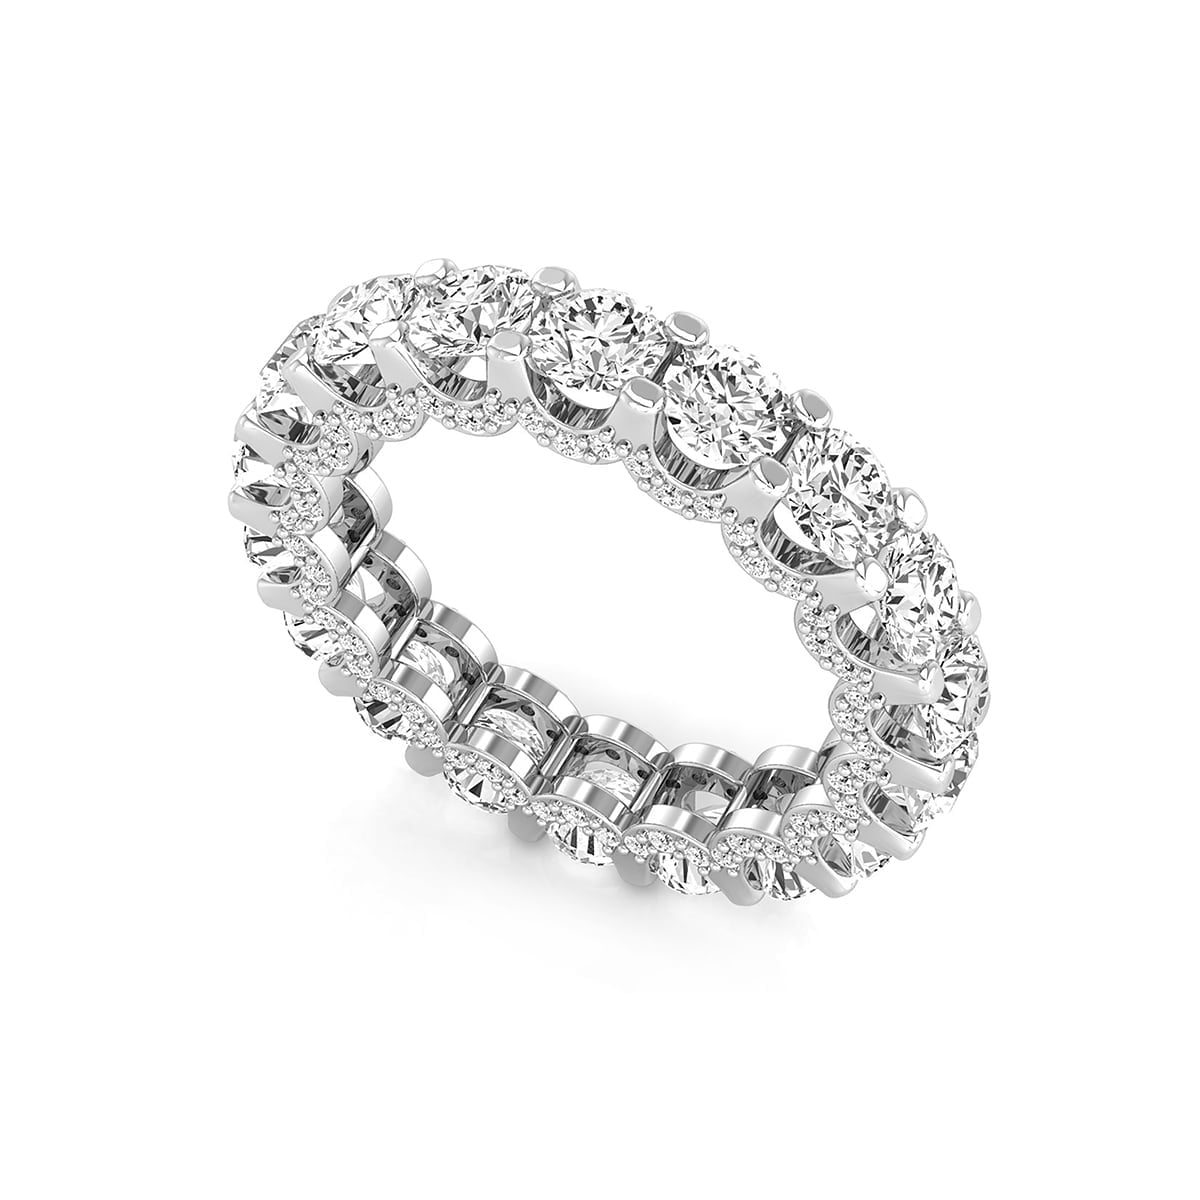 Round Cut Moissanite Stackable Matching Eternity Wedding Anniversary Gift Band ( 4 5/7 TCW)